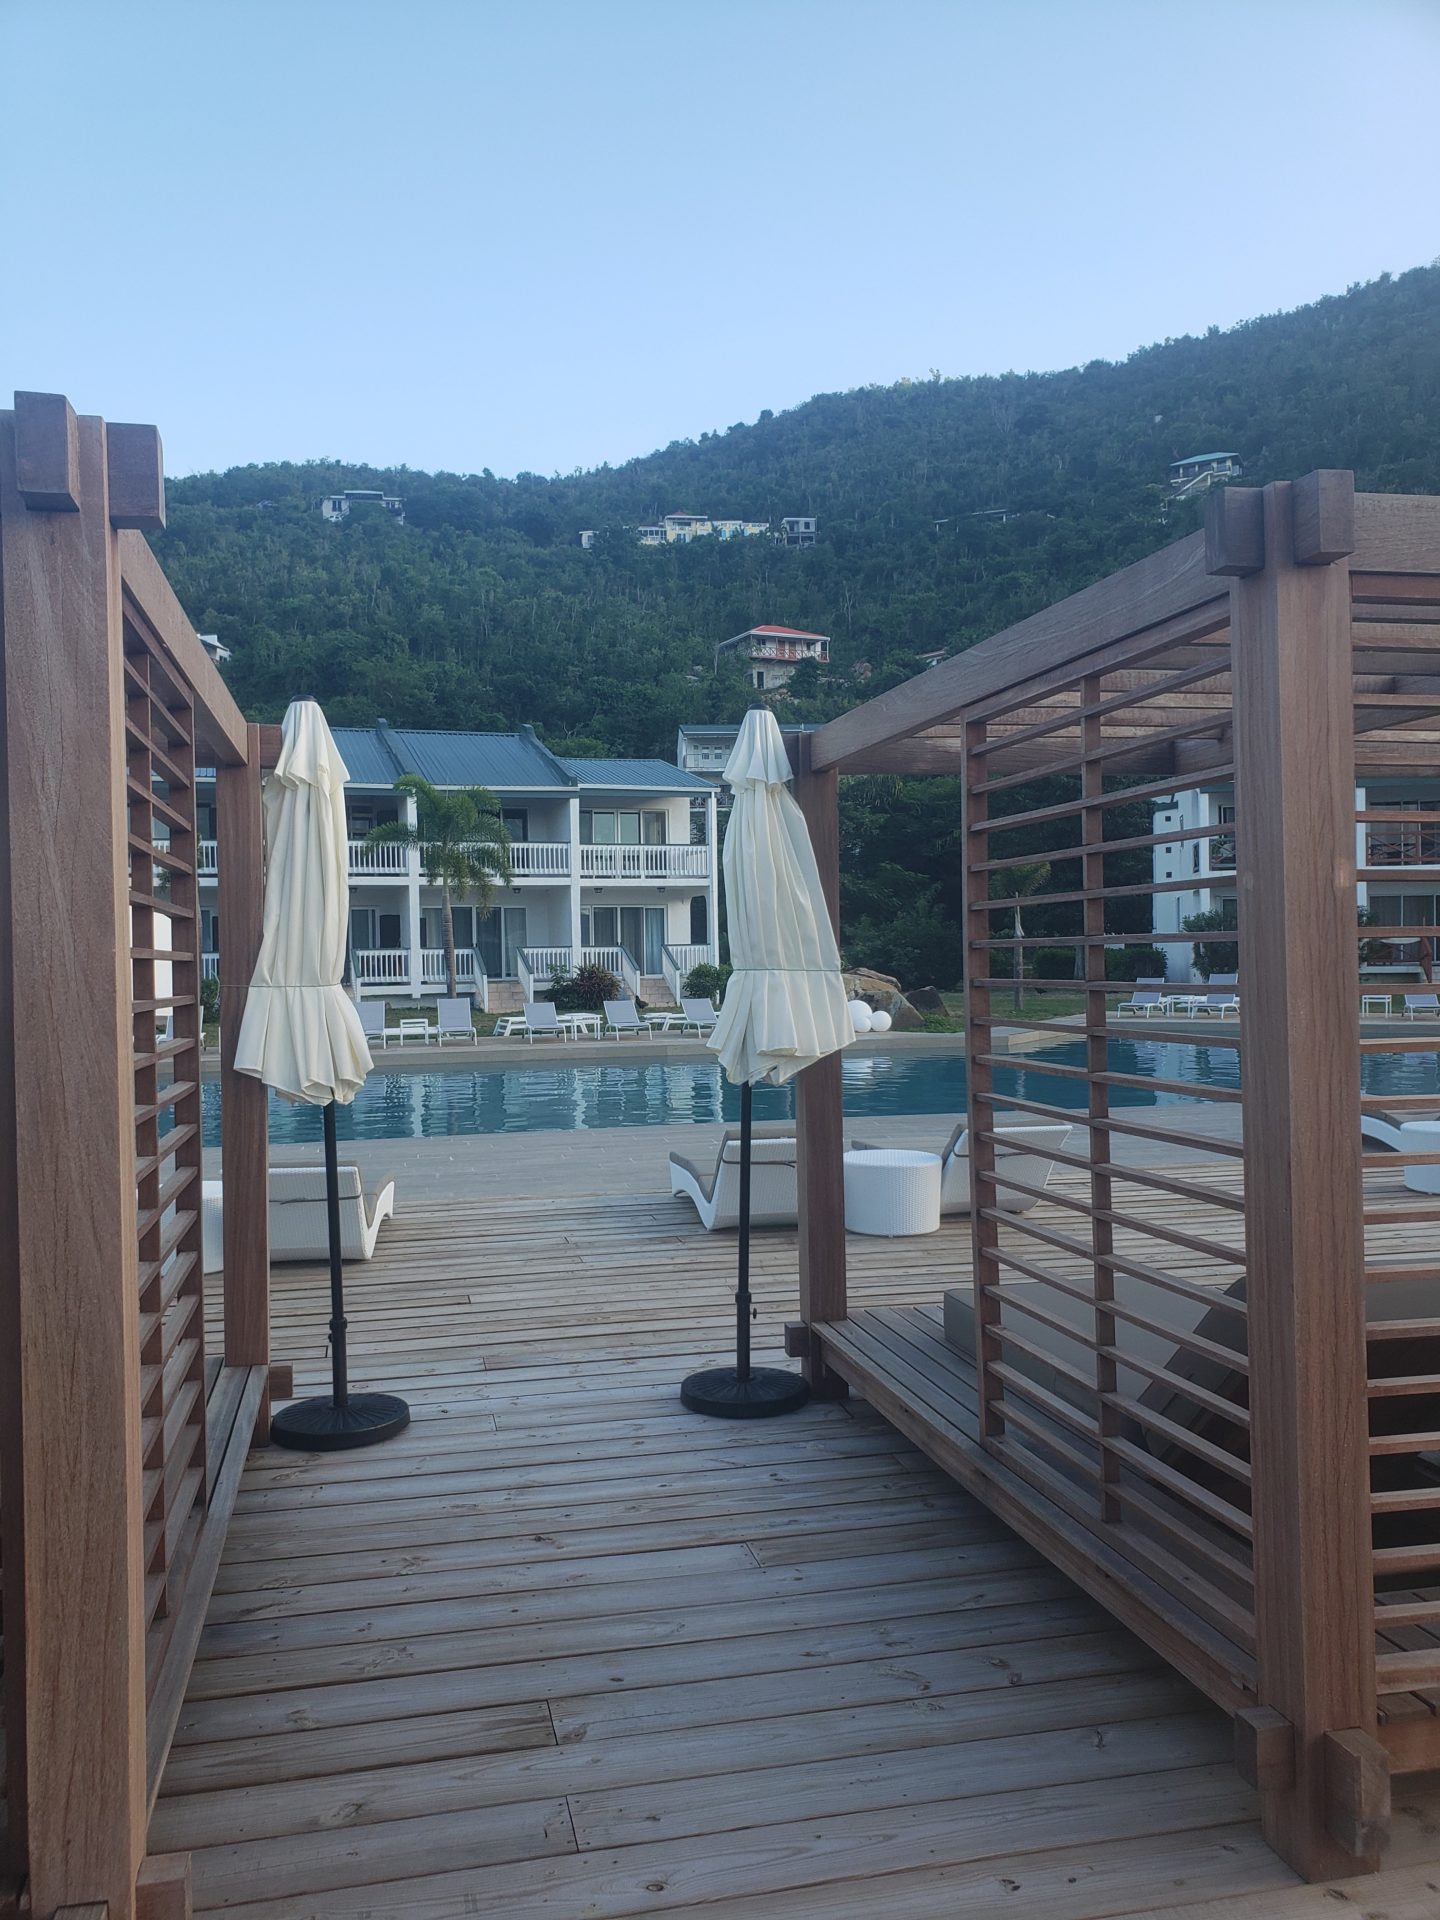 a wooden deck with umbrellas and a pool in the background